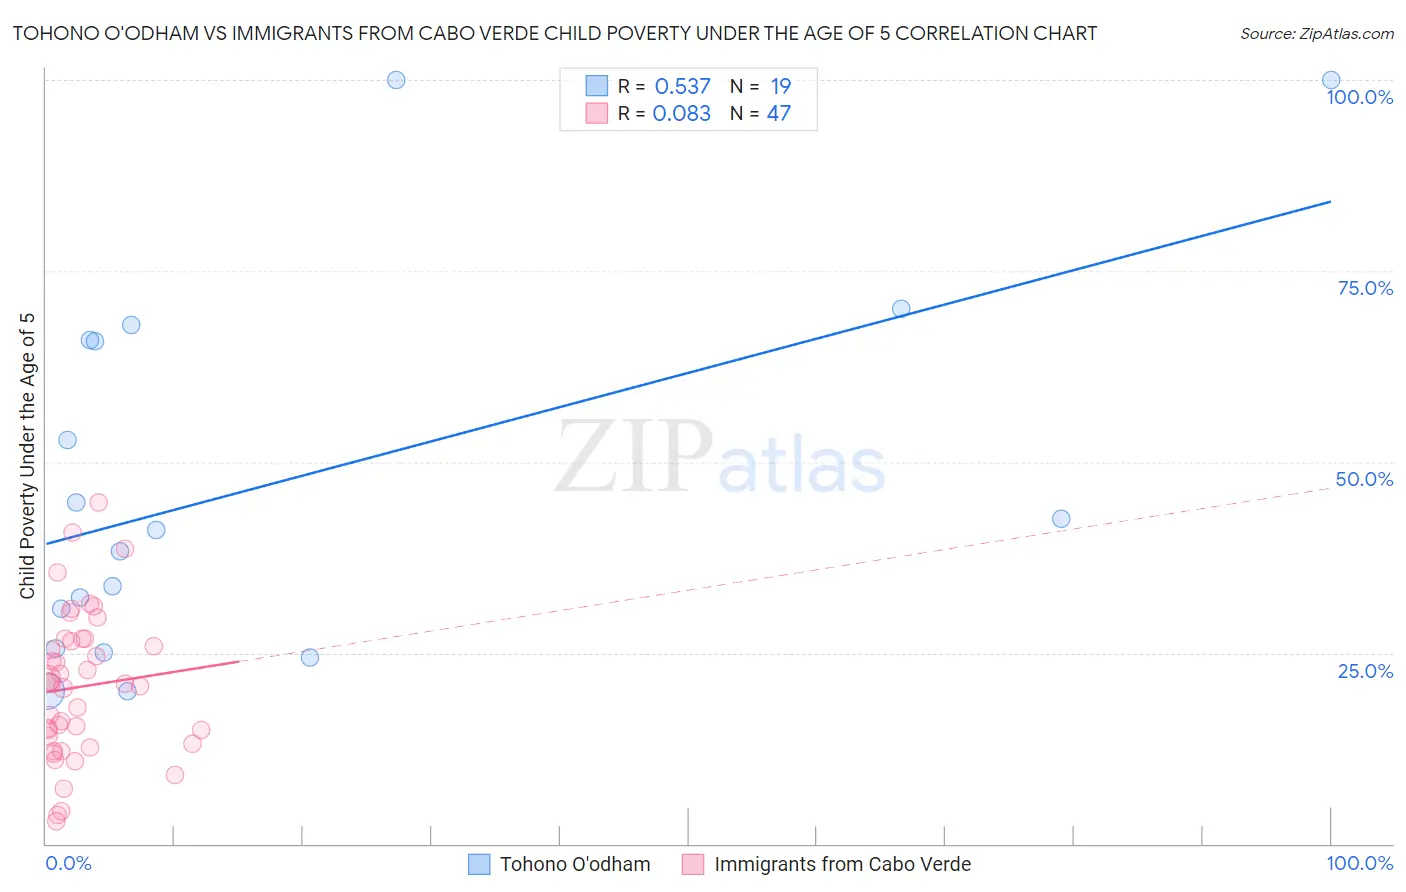 Tohono O'odham vs Immigrants from Cabo Verde Child Poverty Under the Age of 5